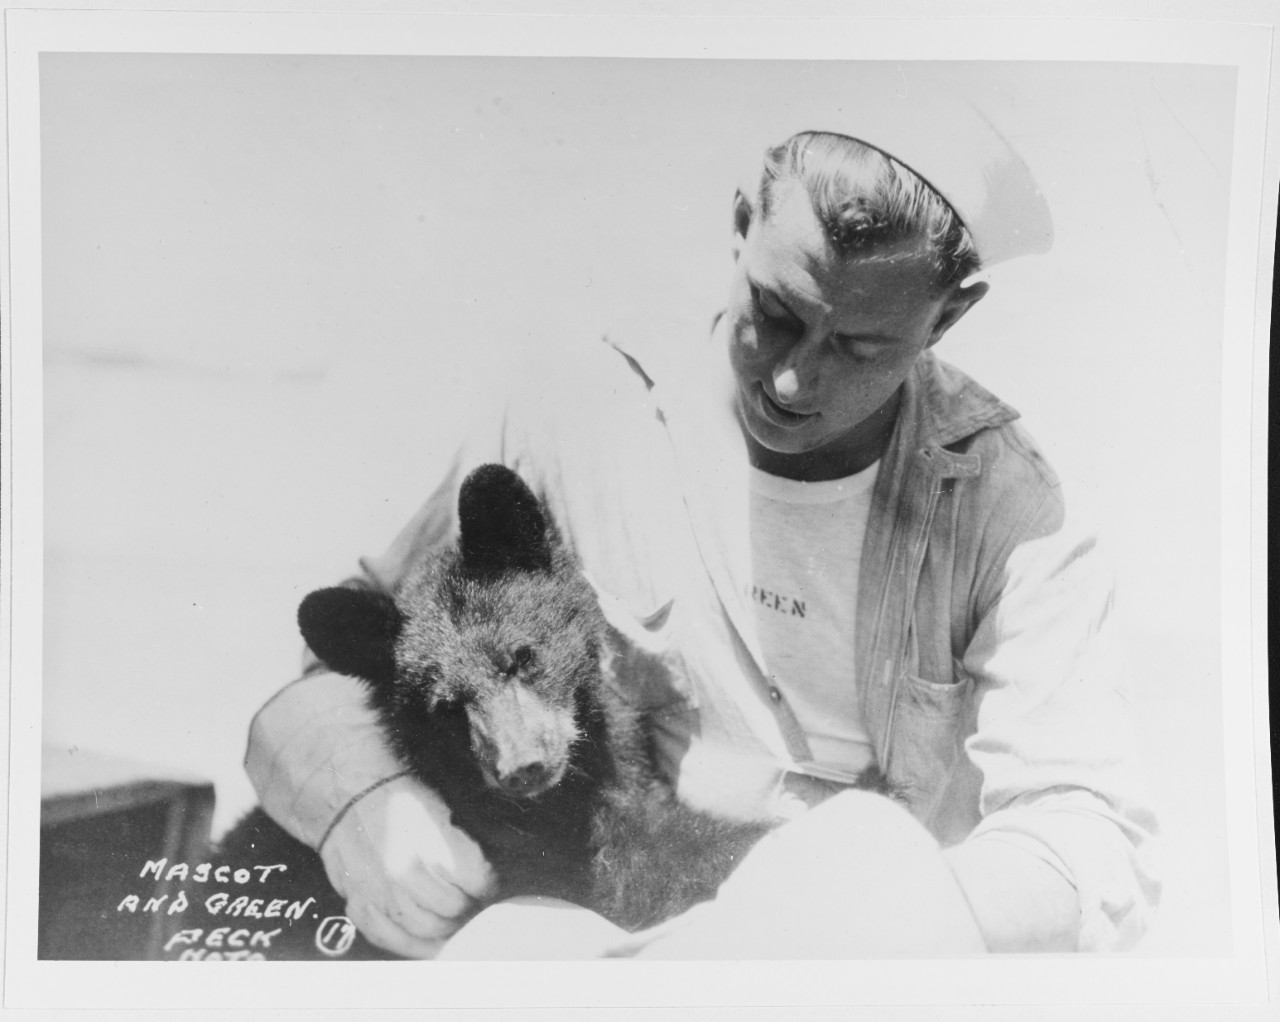 A United States Navy man named Green with a pet bear cub on board